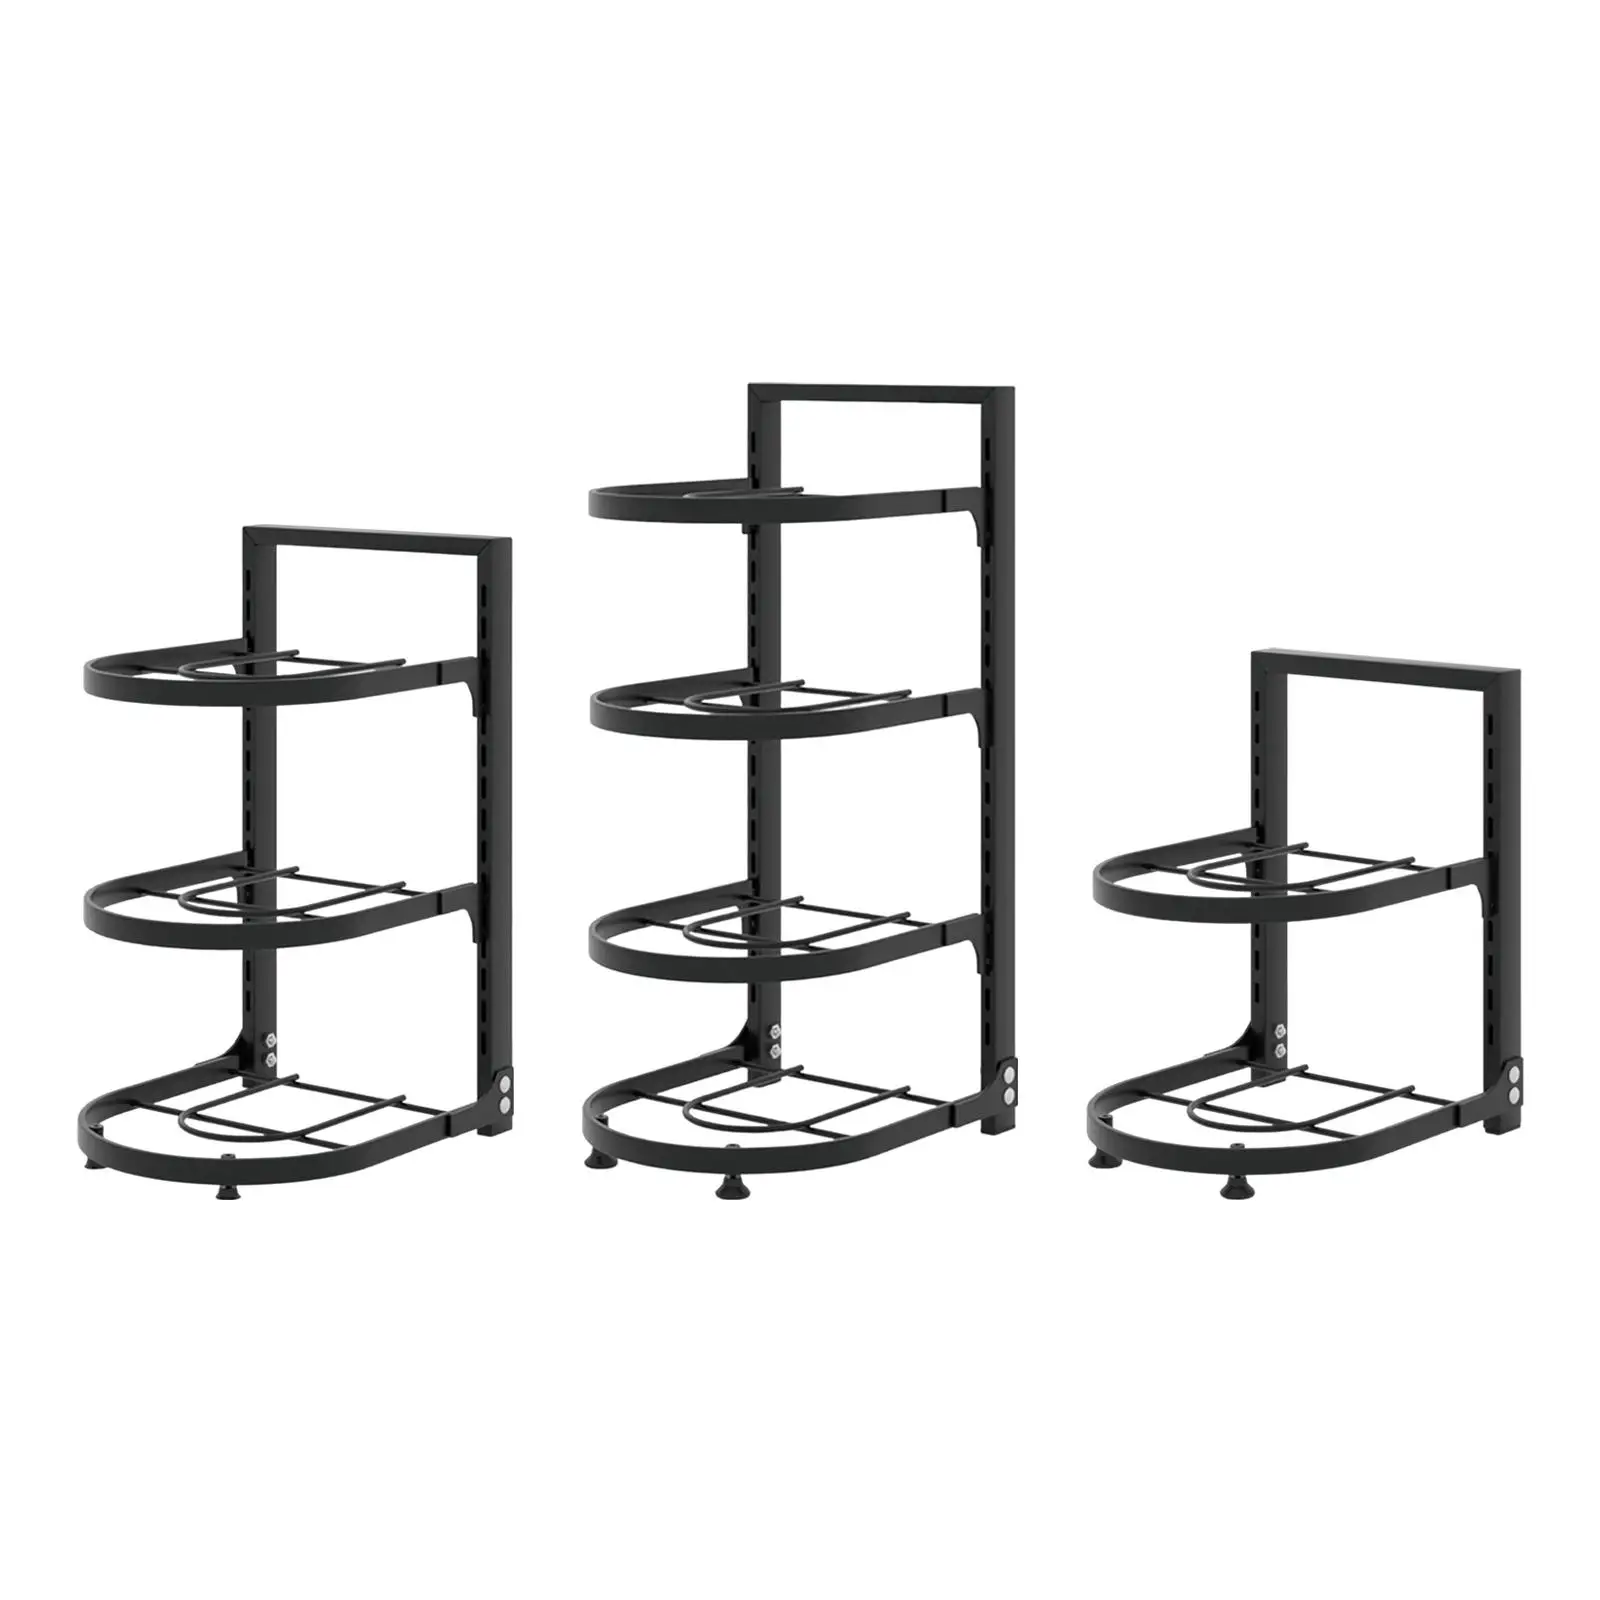 Pan Organizer Multi Layer Pot Rack for Organizer Cookware Stand Home Kitchen